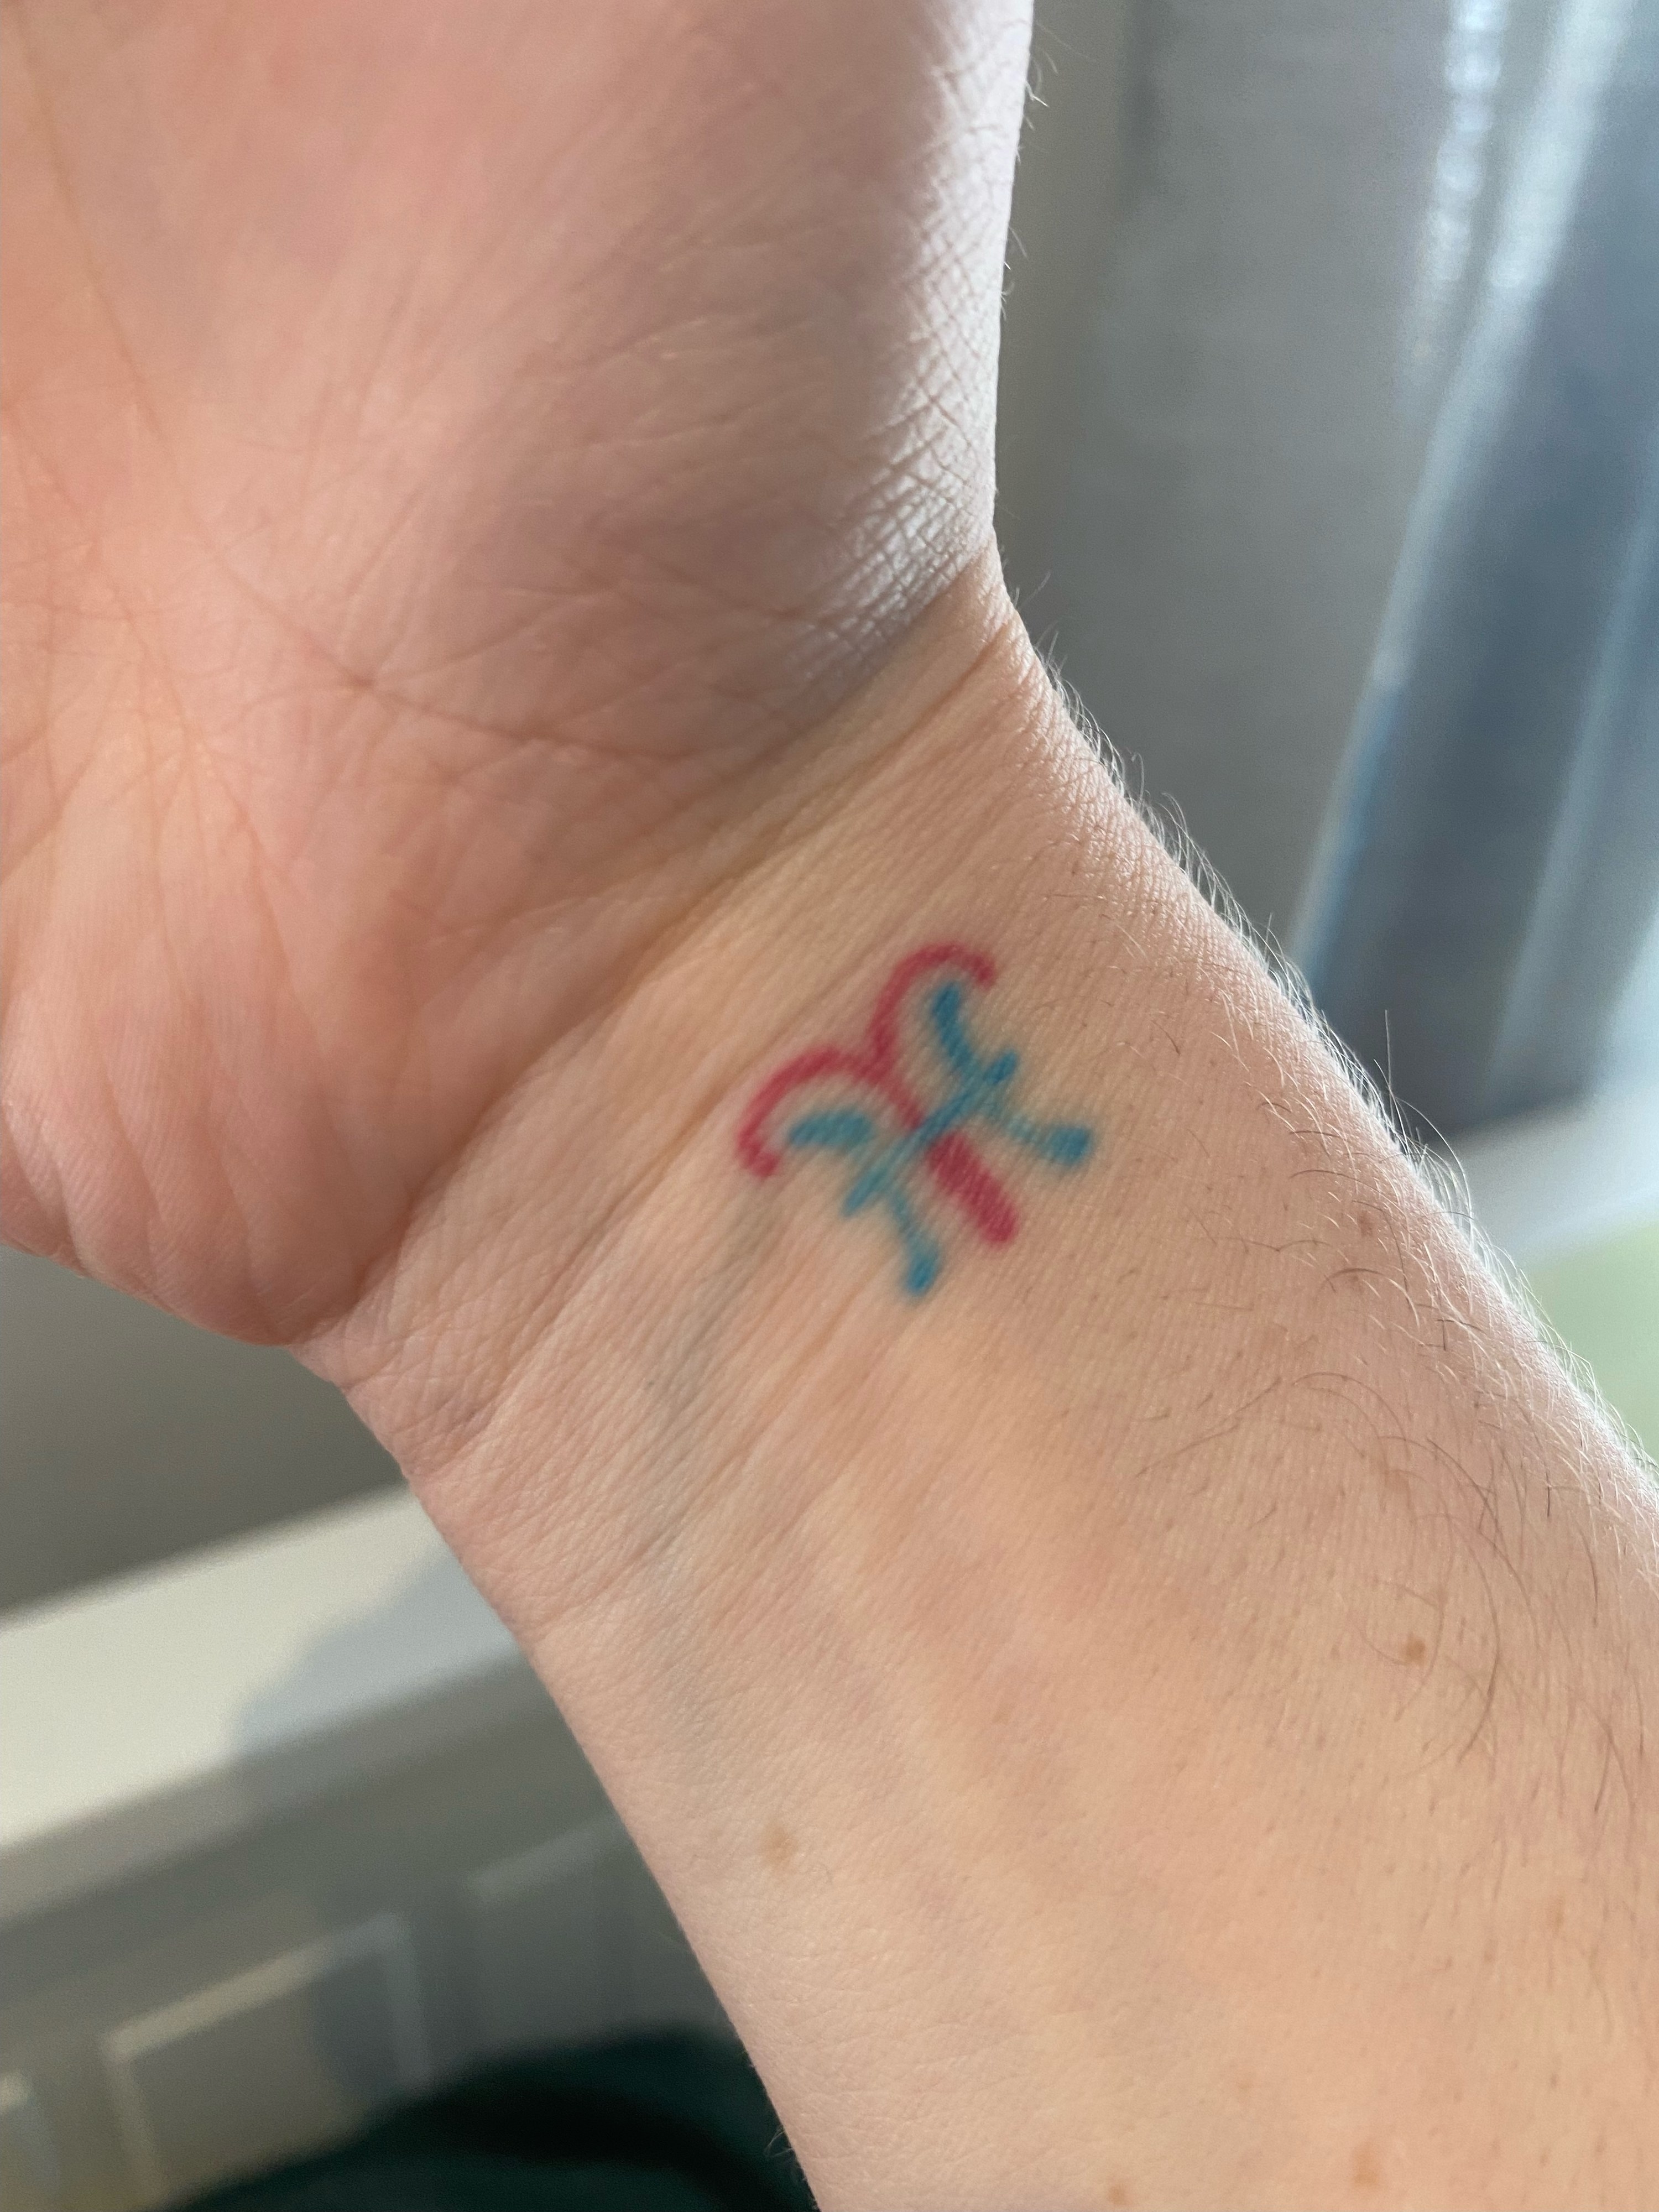 An astrological sign tattoo on someone&#x27;s inside wrist